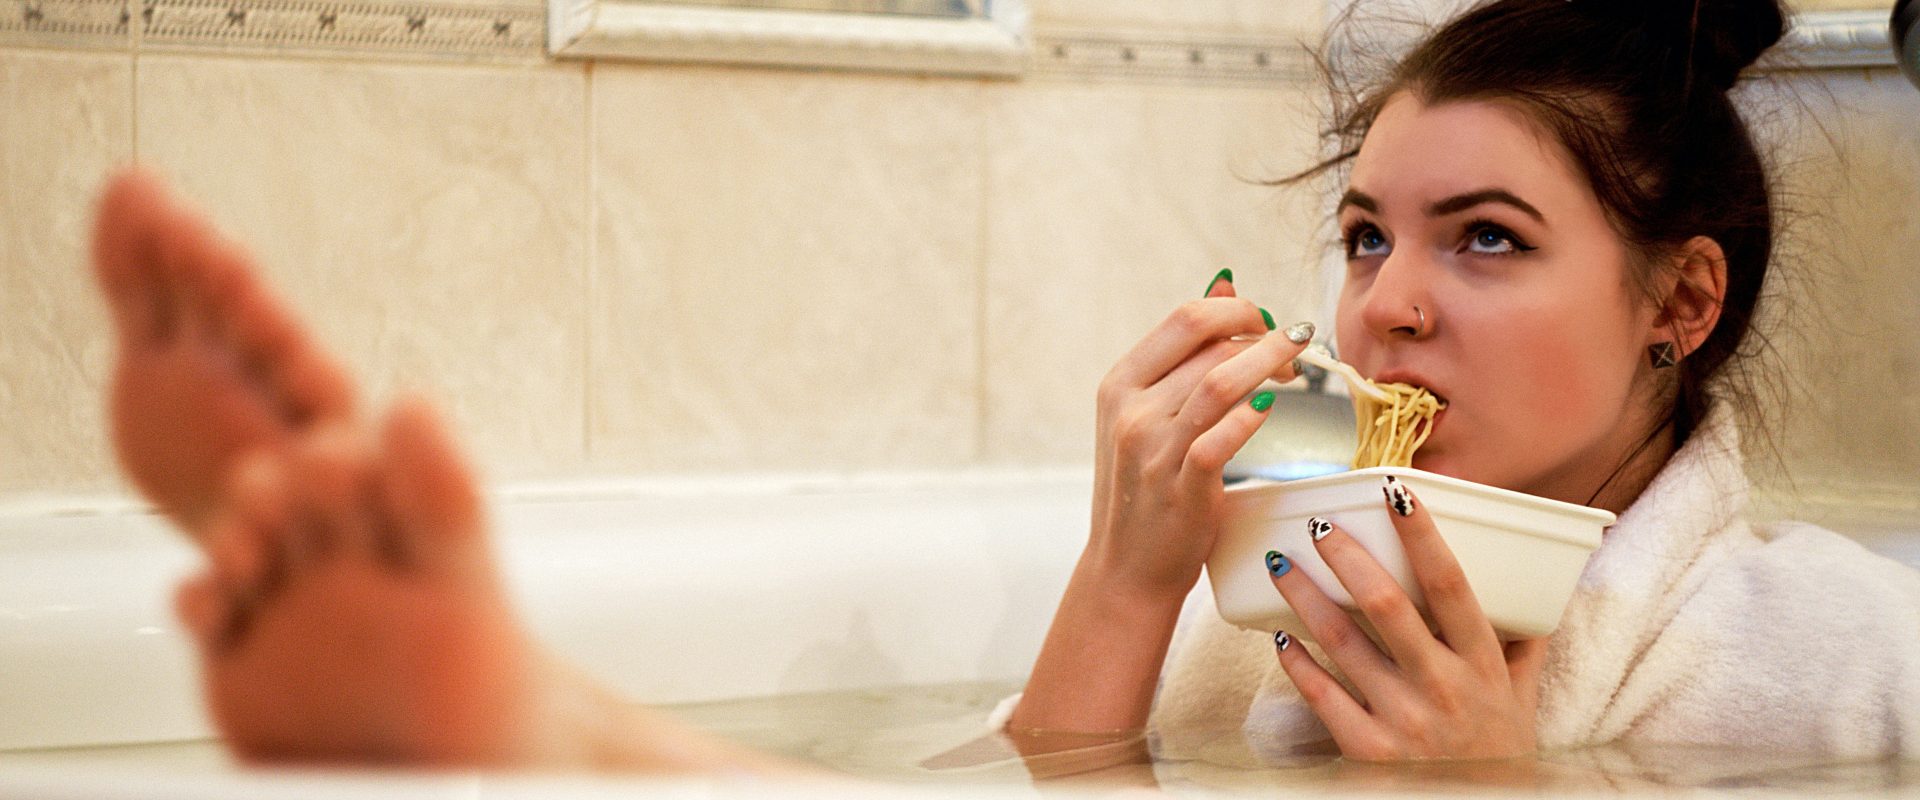 a woman in a bath eating pasta